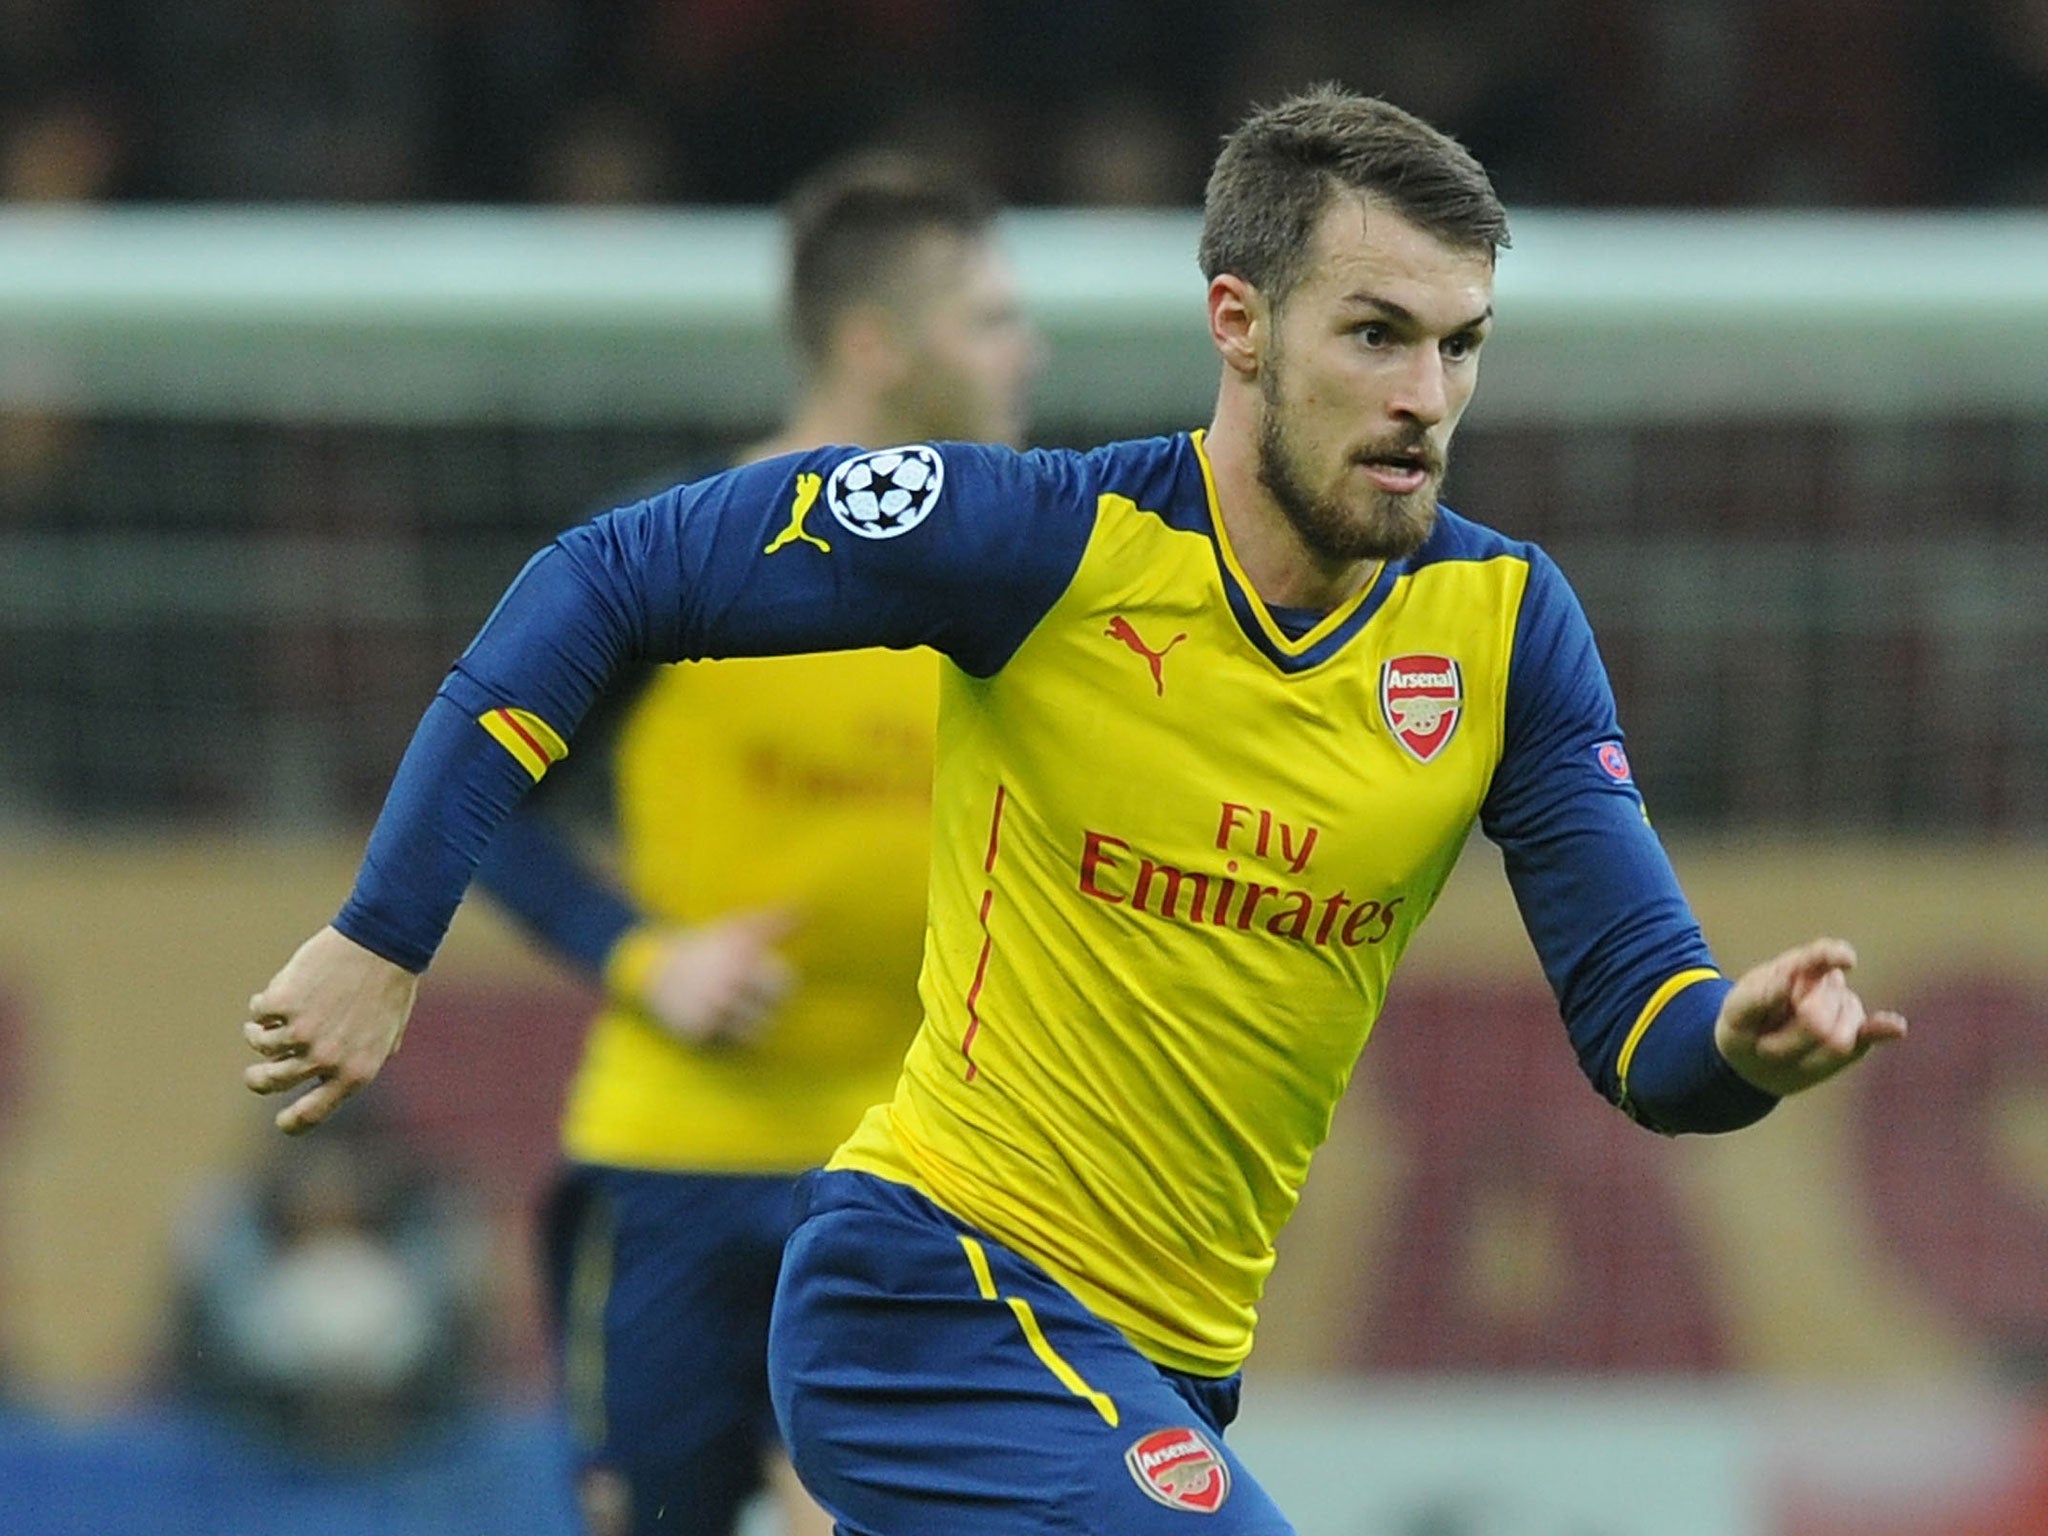 Aaron Ramsey was forced off at half-time after suffering a hamstring injury